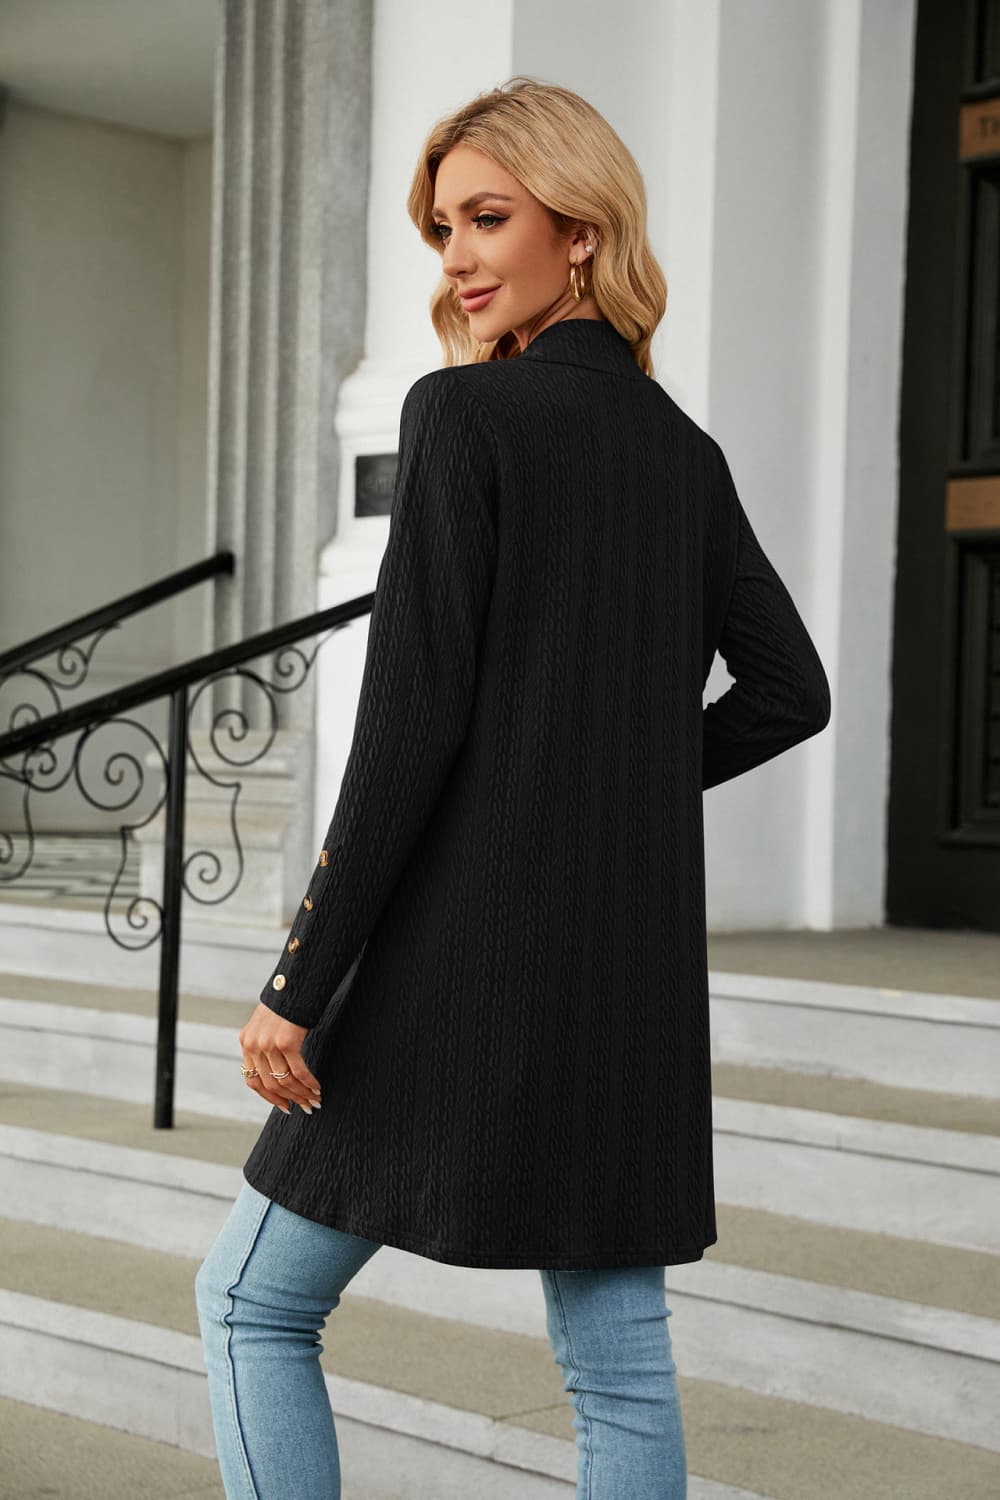 Long Sleeve Open Front Cardigan - Women’s Clothing & Accessories - Shirts & Tops - 24 - 2024